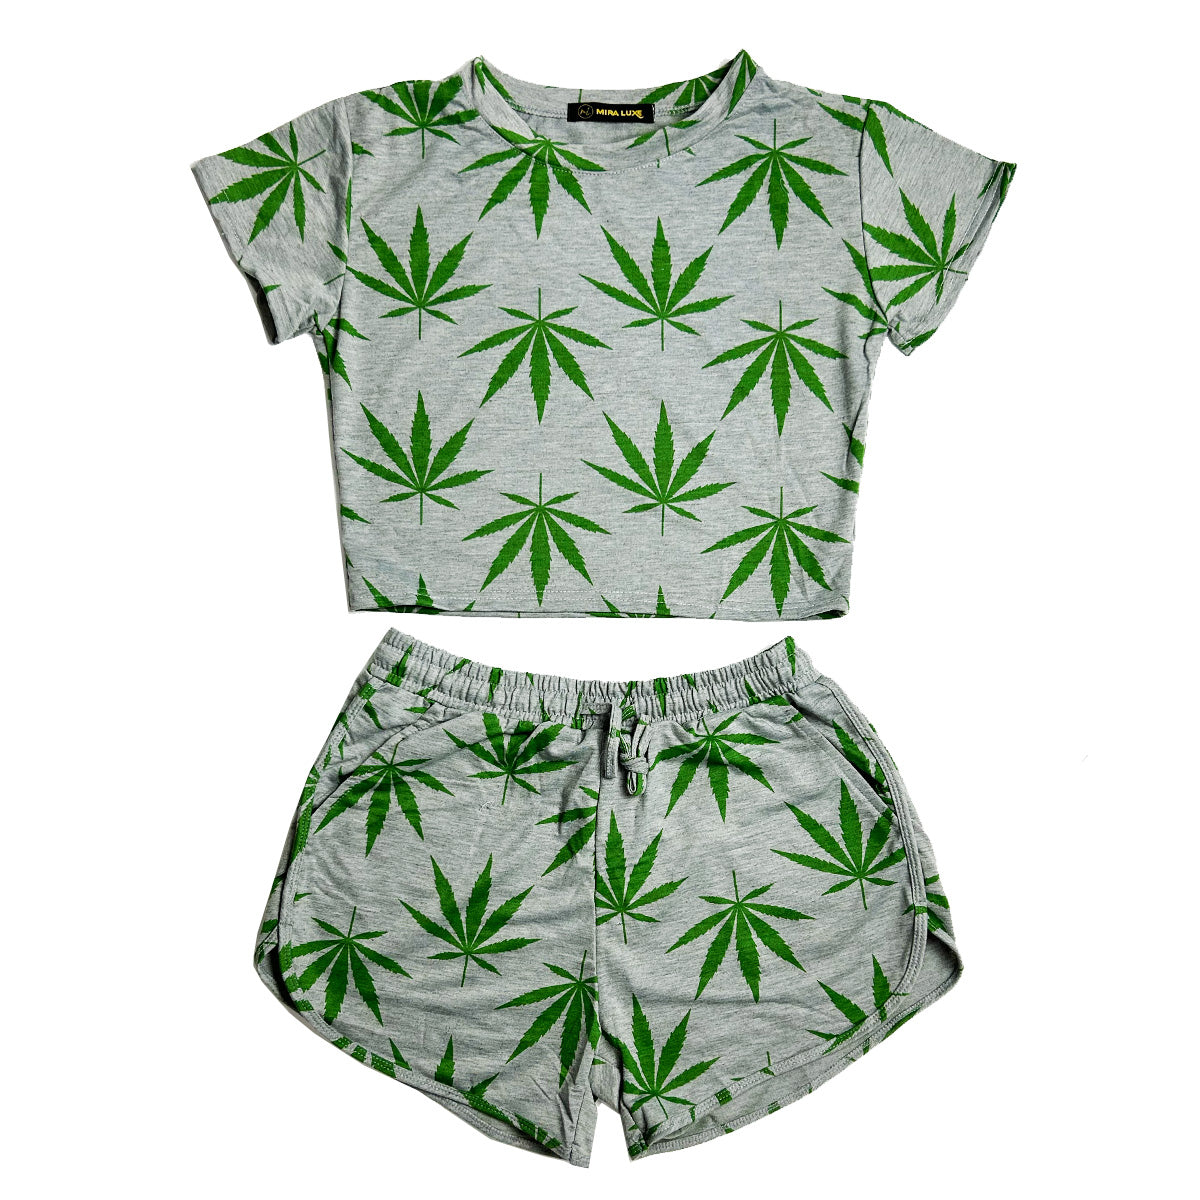 Woman Weed Green Leaf Crop Top with SHORTS - Pack of 6 Units 2M, 2L, 2XL